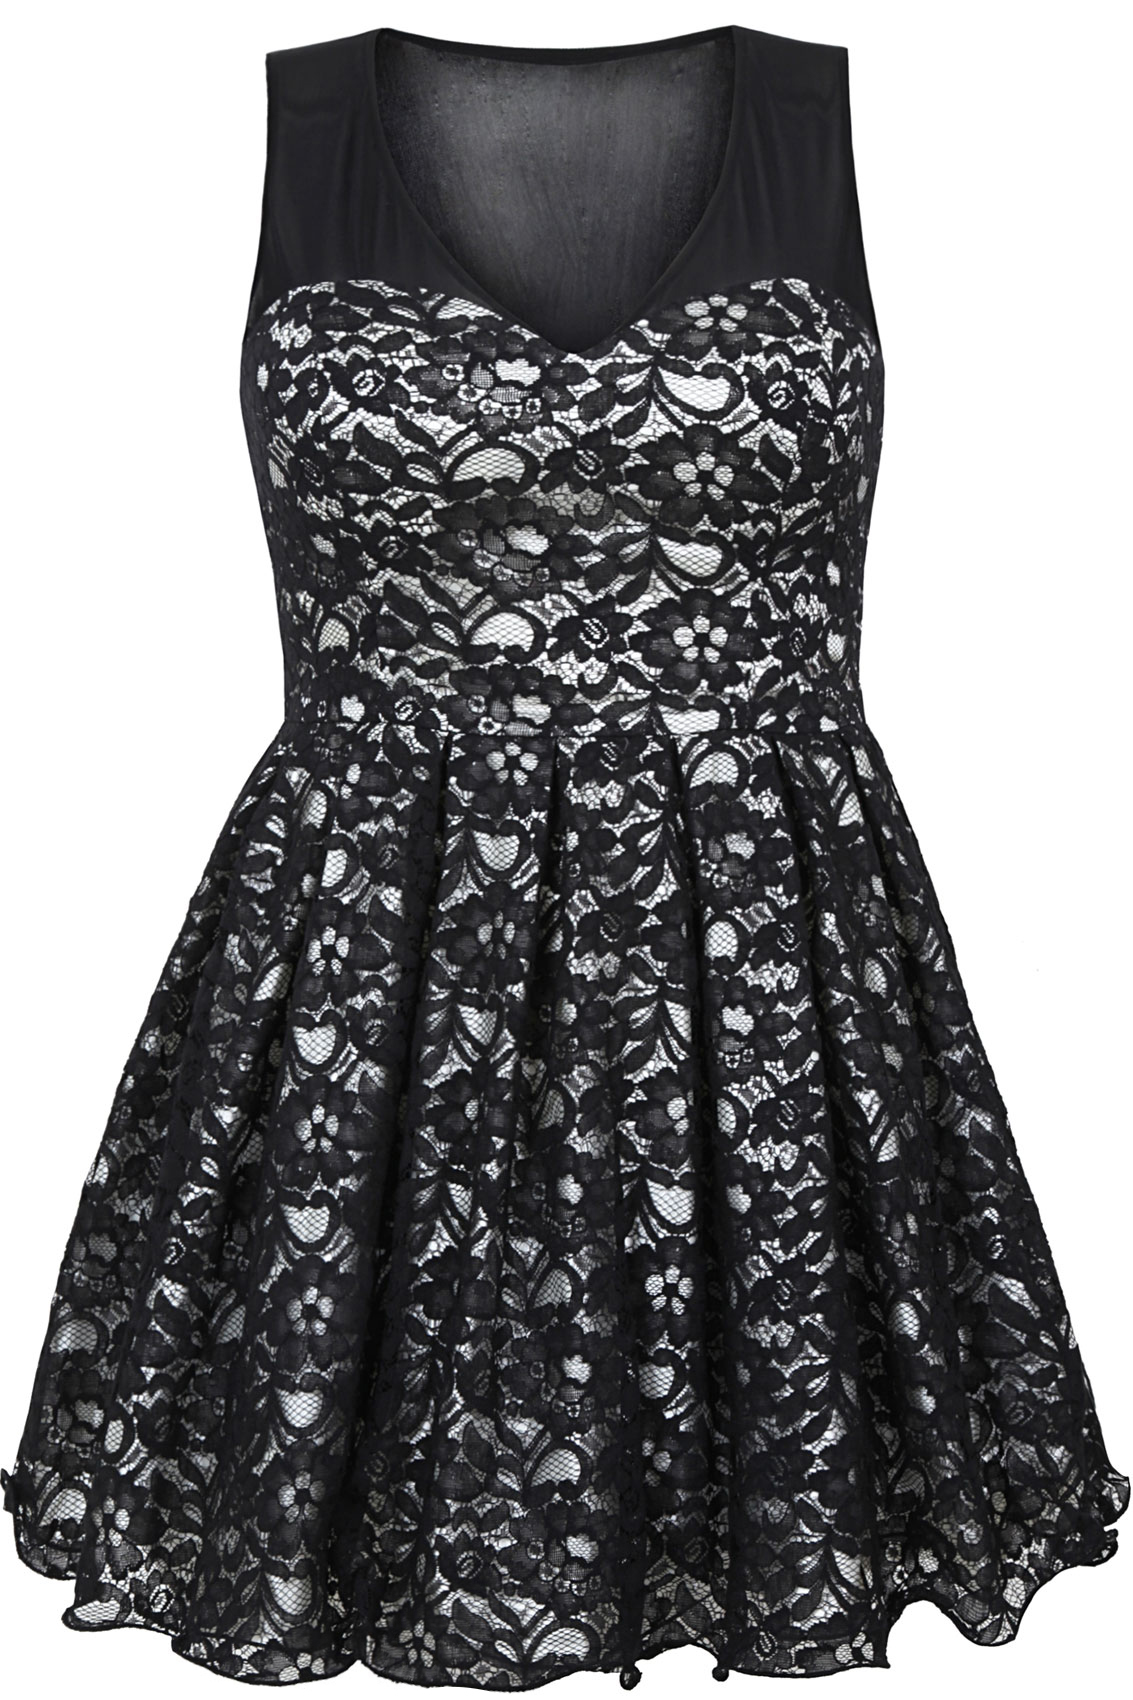 Black & Ivory Floral Lace Sleeveless Skater Prom Dress plus Size 14 to 28